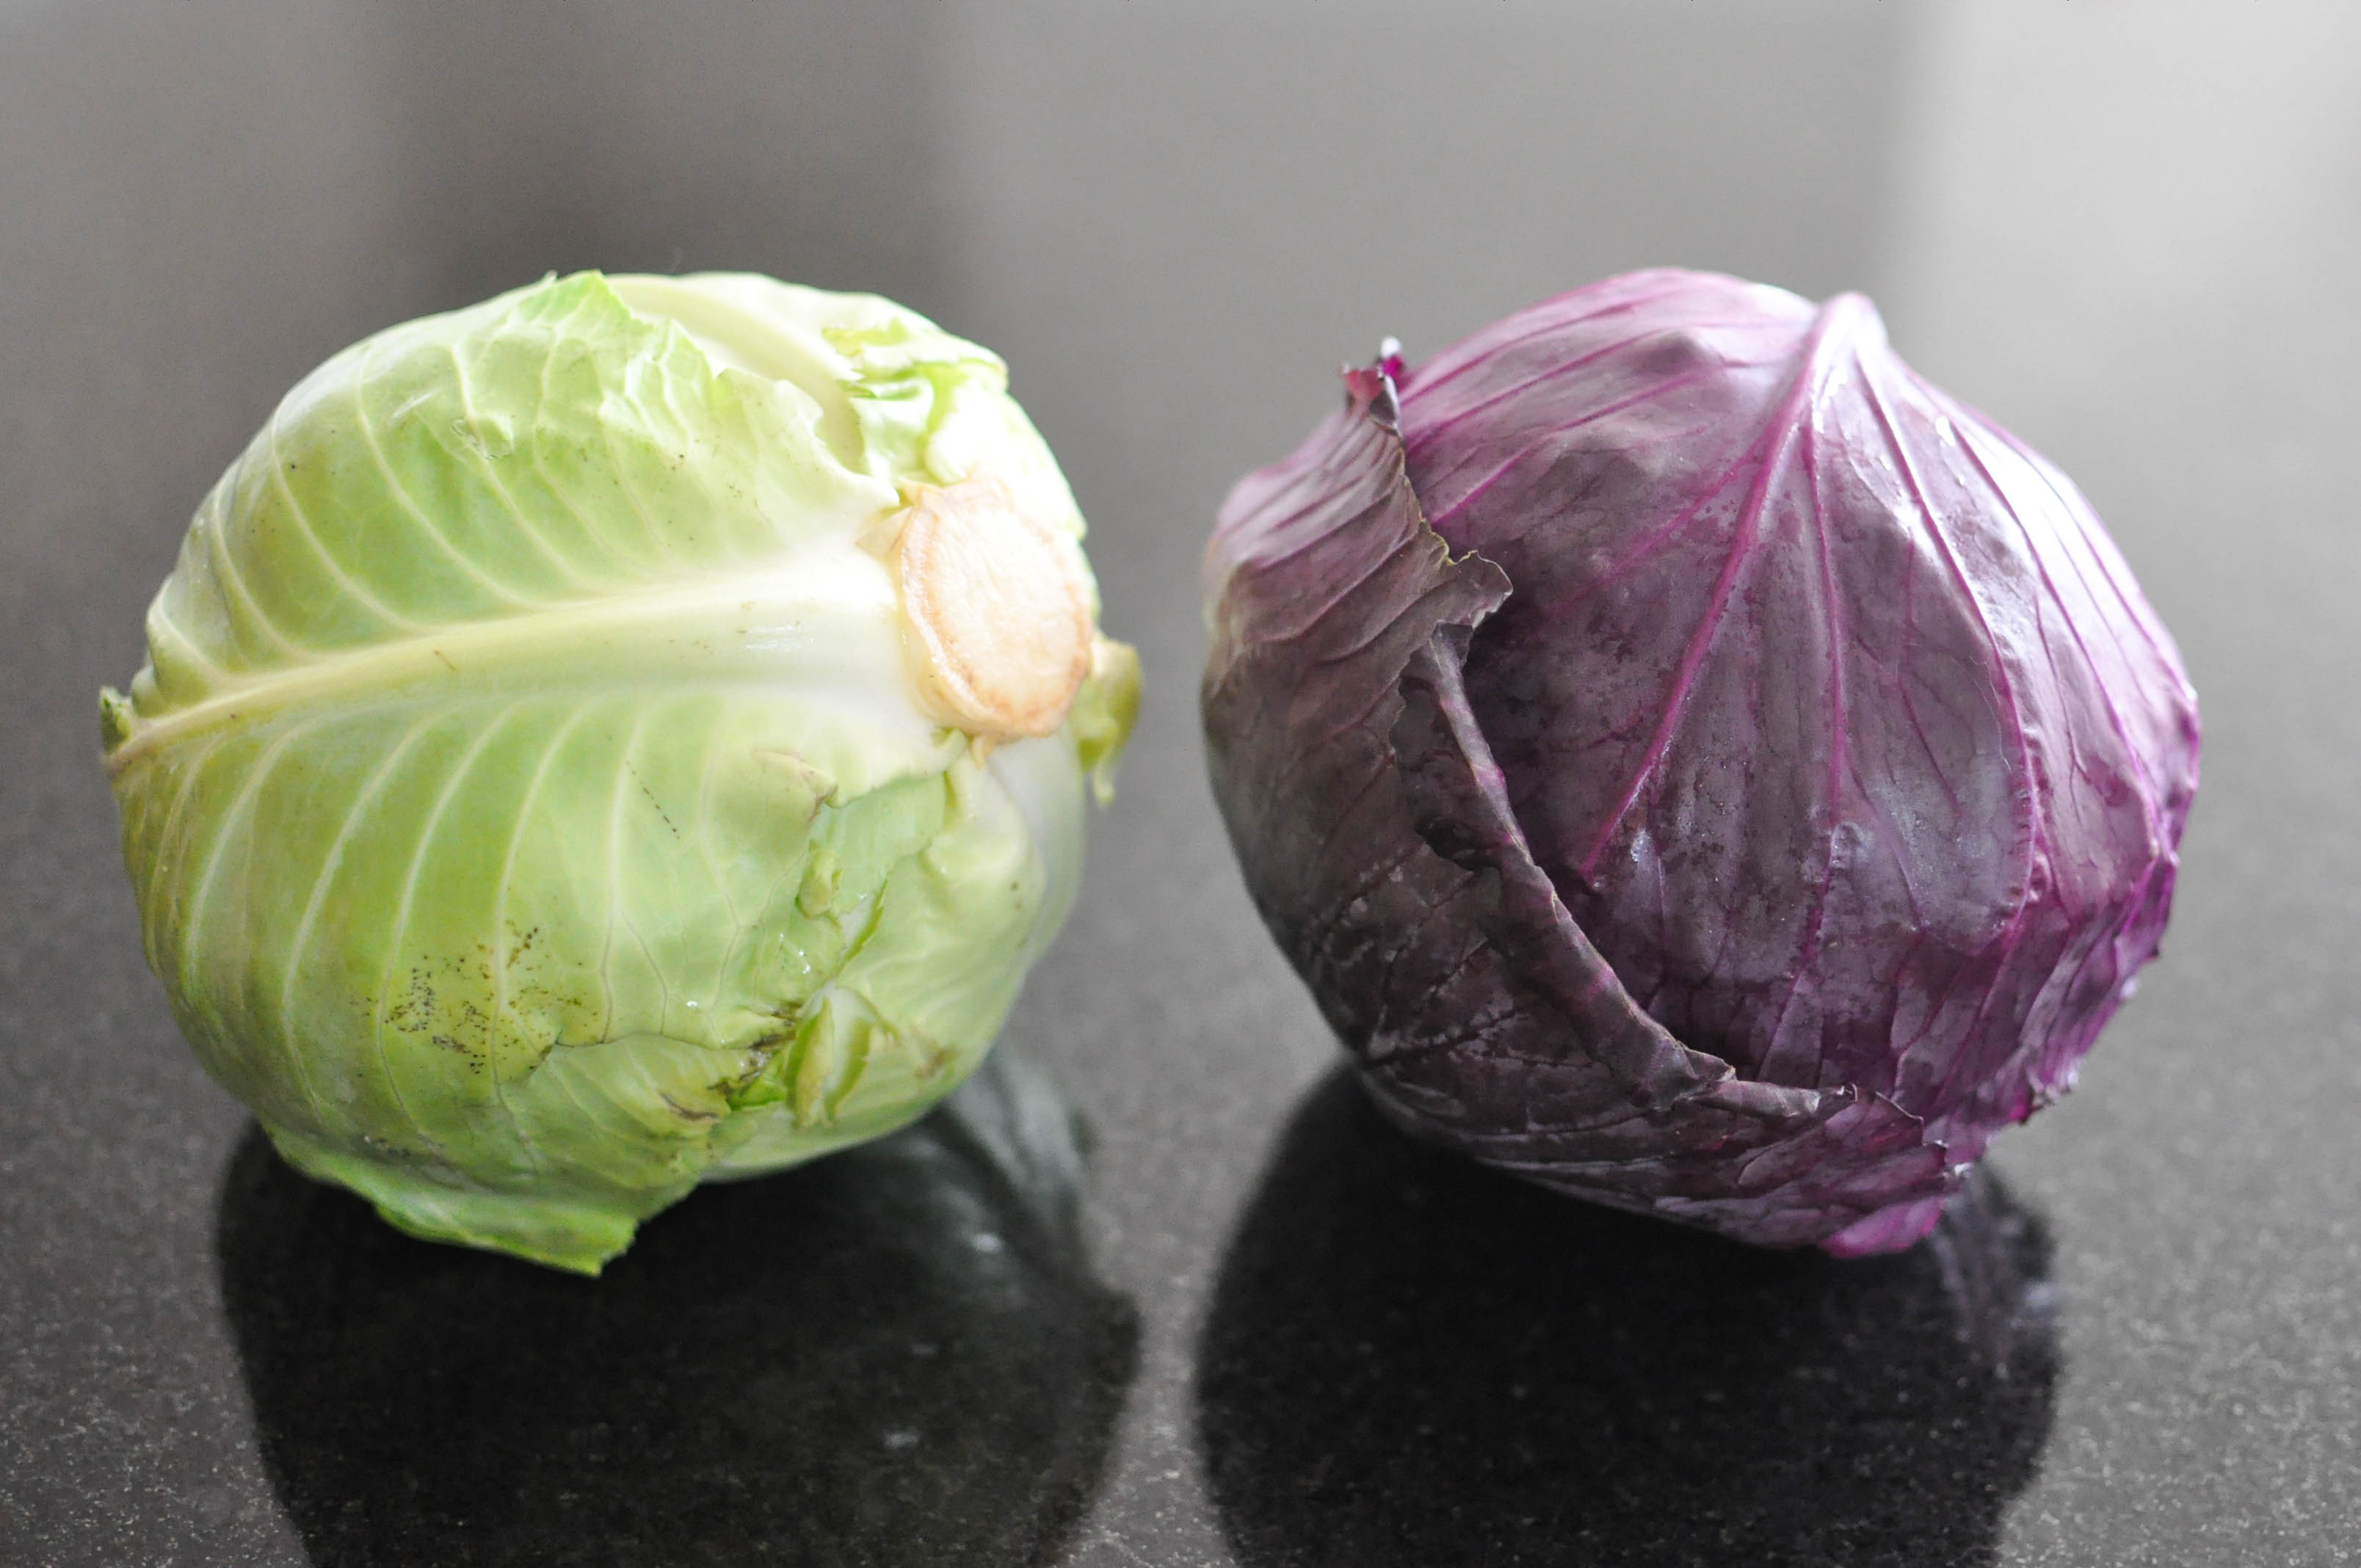 gather_s-roasted-green-and-purple-cabbage-fedfit-9